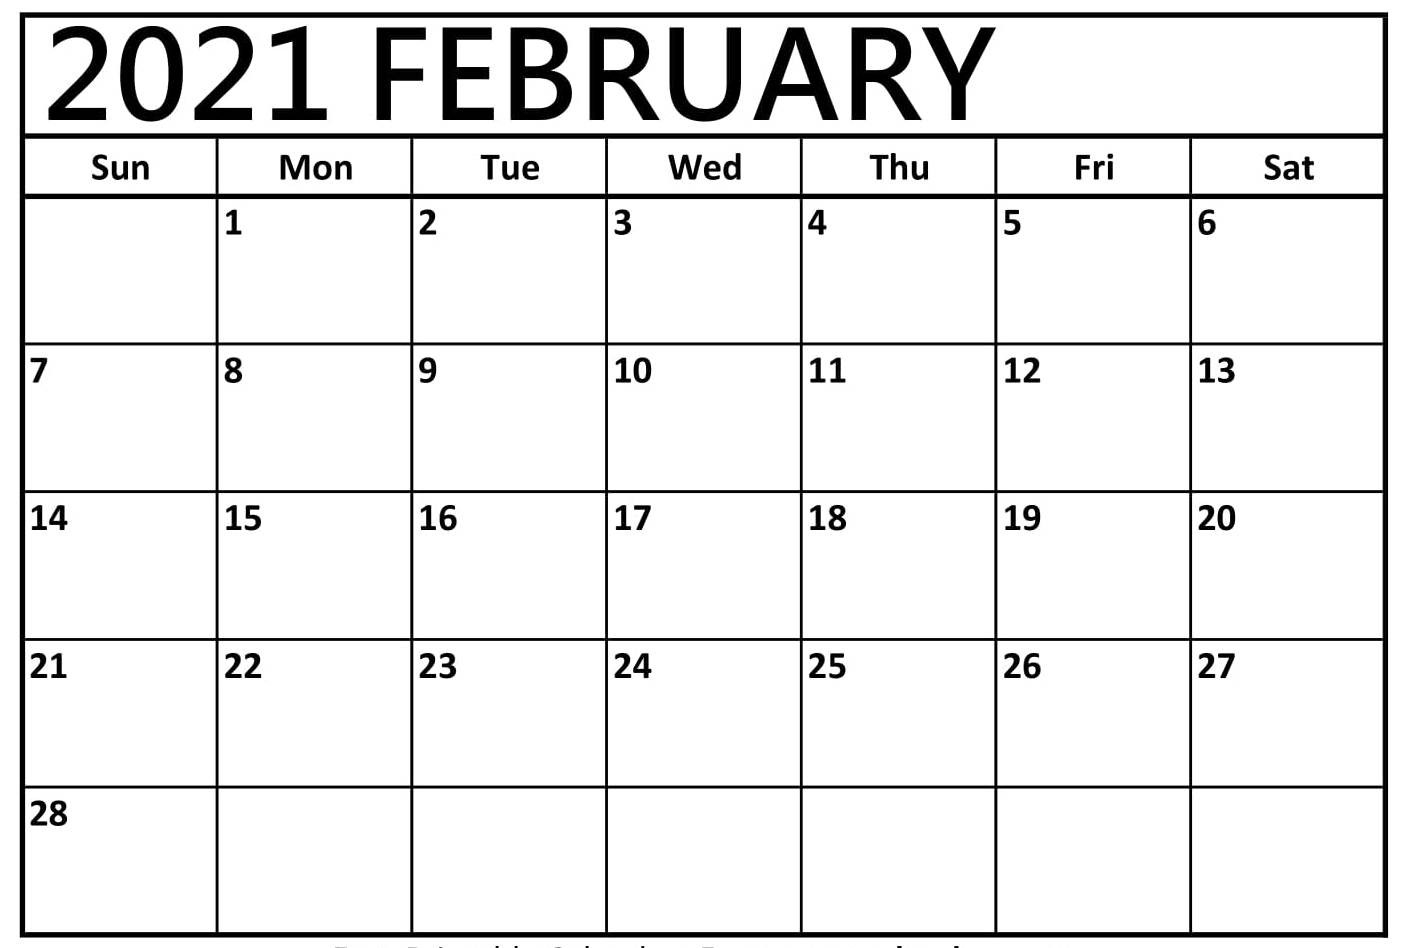 February 2021 Printable Calendar Pdf Monthly Worksheets-Print Free Calendars Without Downloading 2021